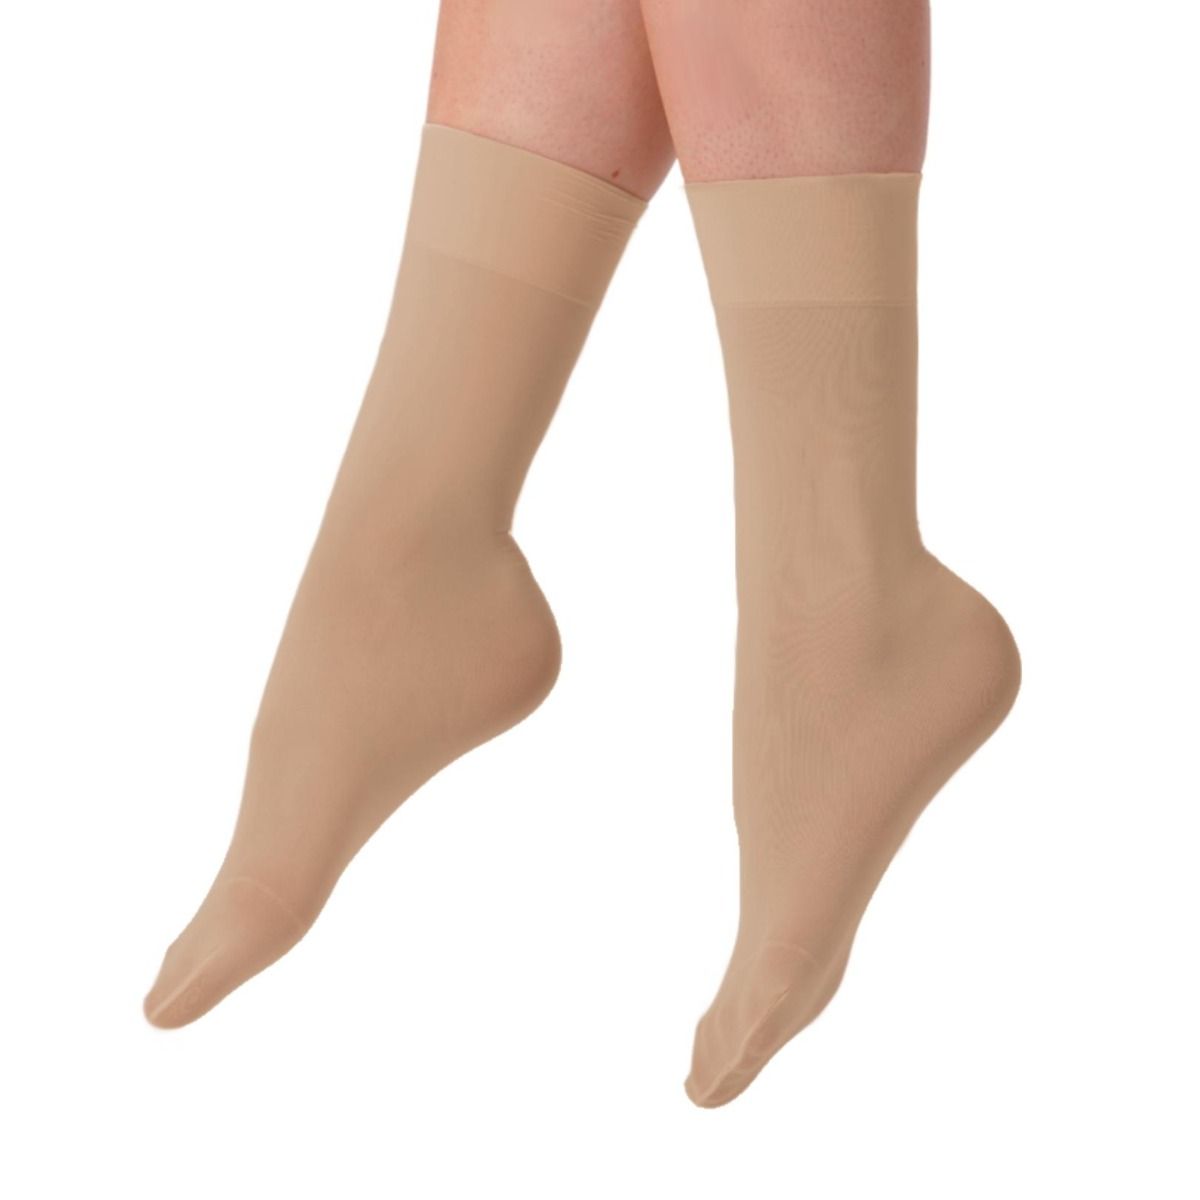 Dancing Dots | Knee-High Compression Socks For Women